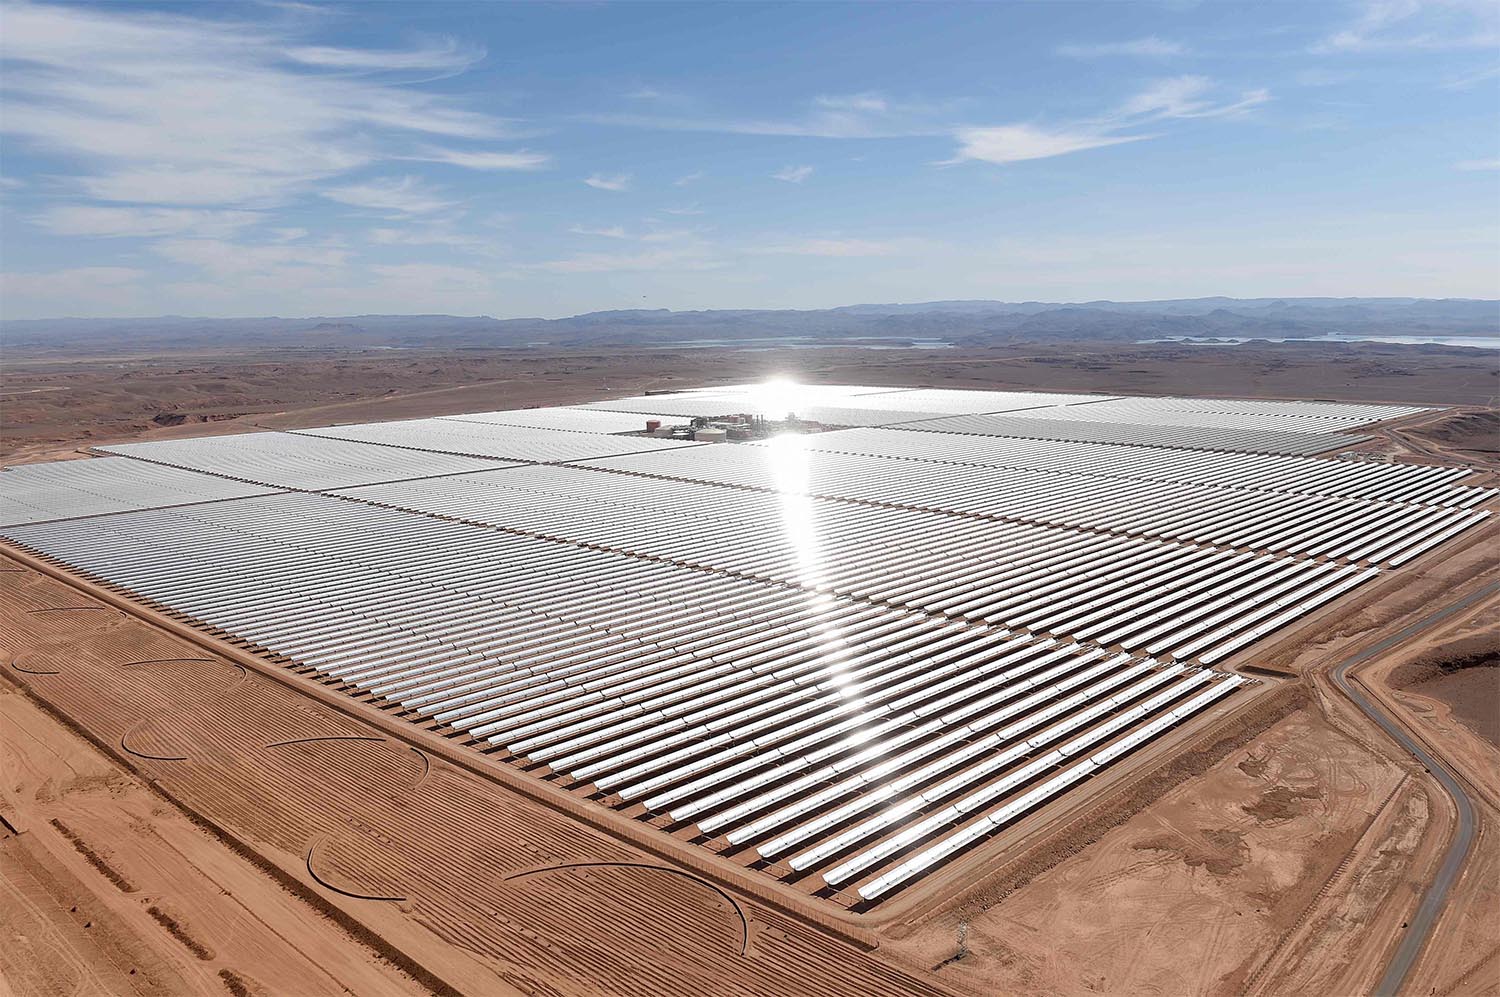 Aerial view of the solar mirrors at the Noor 1 Concentrated Solar Power plant outside Ouarzazate